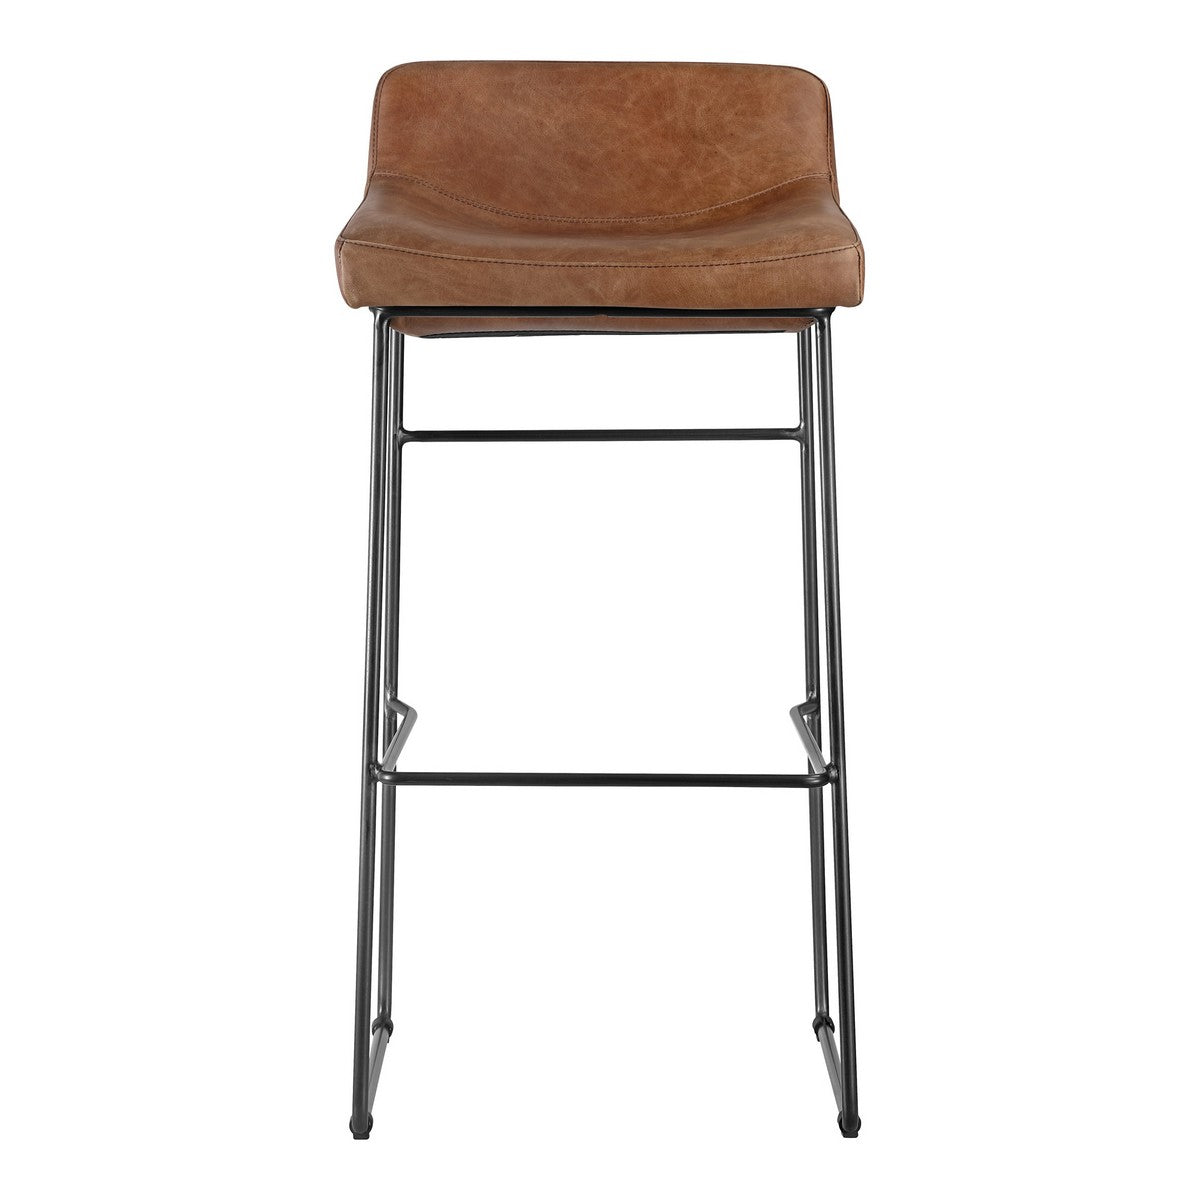 Moe's Home Collection Starlet Barstool Cappuccino-Set of Two - PK-1107-14 - Moe's Home Collection - Bar Stools - Minimal And Modern - 1